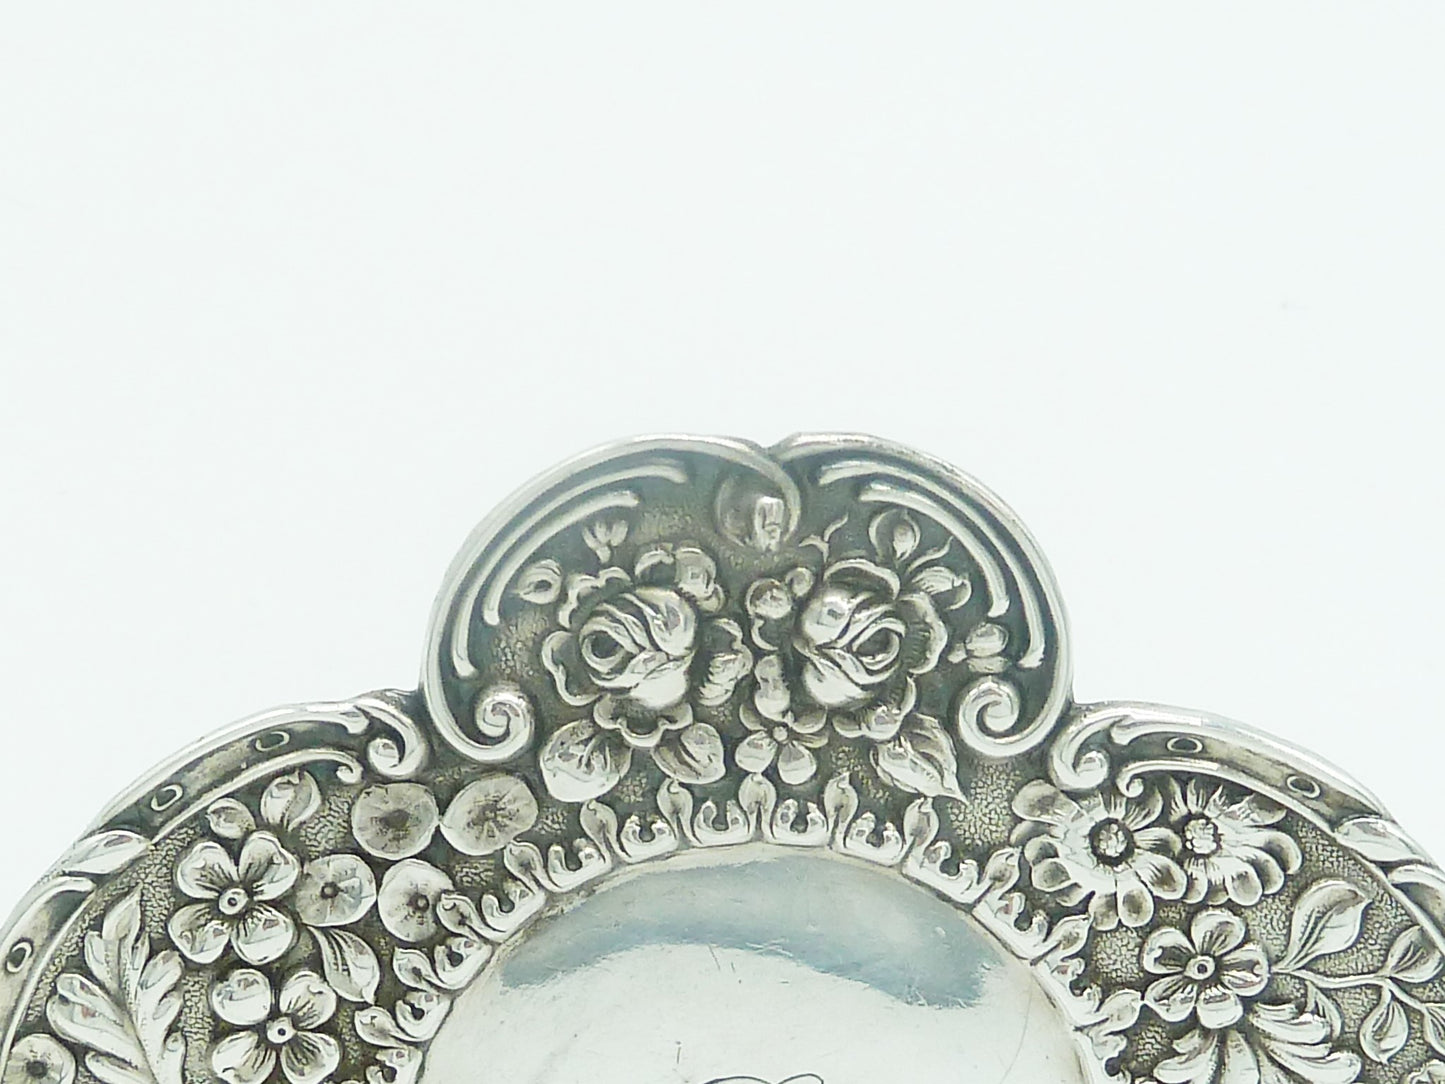 repousee work flowers acanthus on sterling silver - 43 Chesapeake Court Antiques 